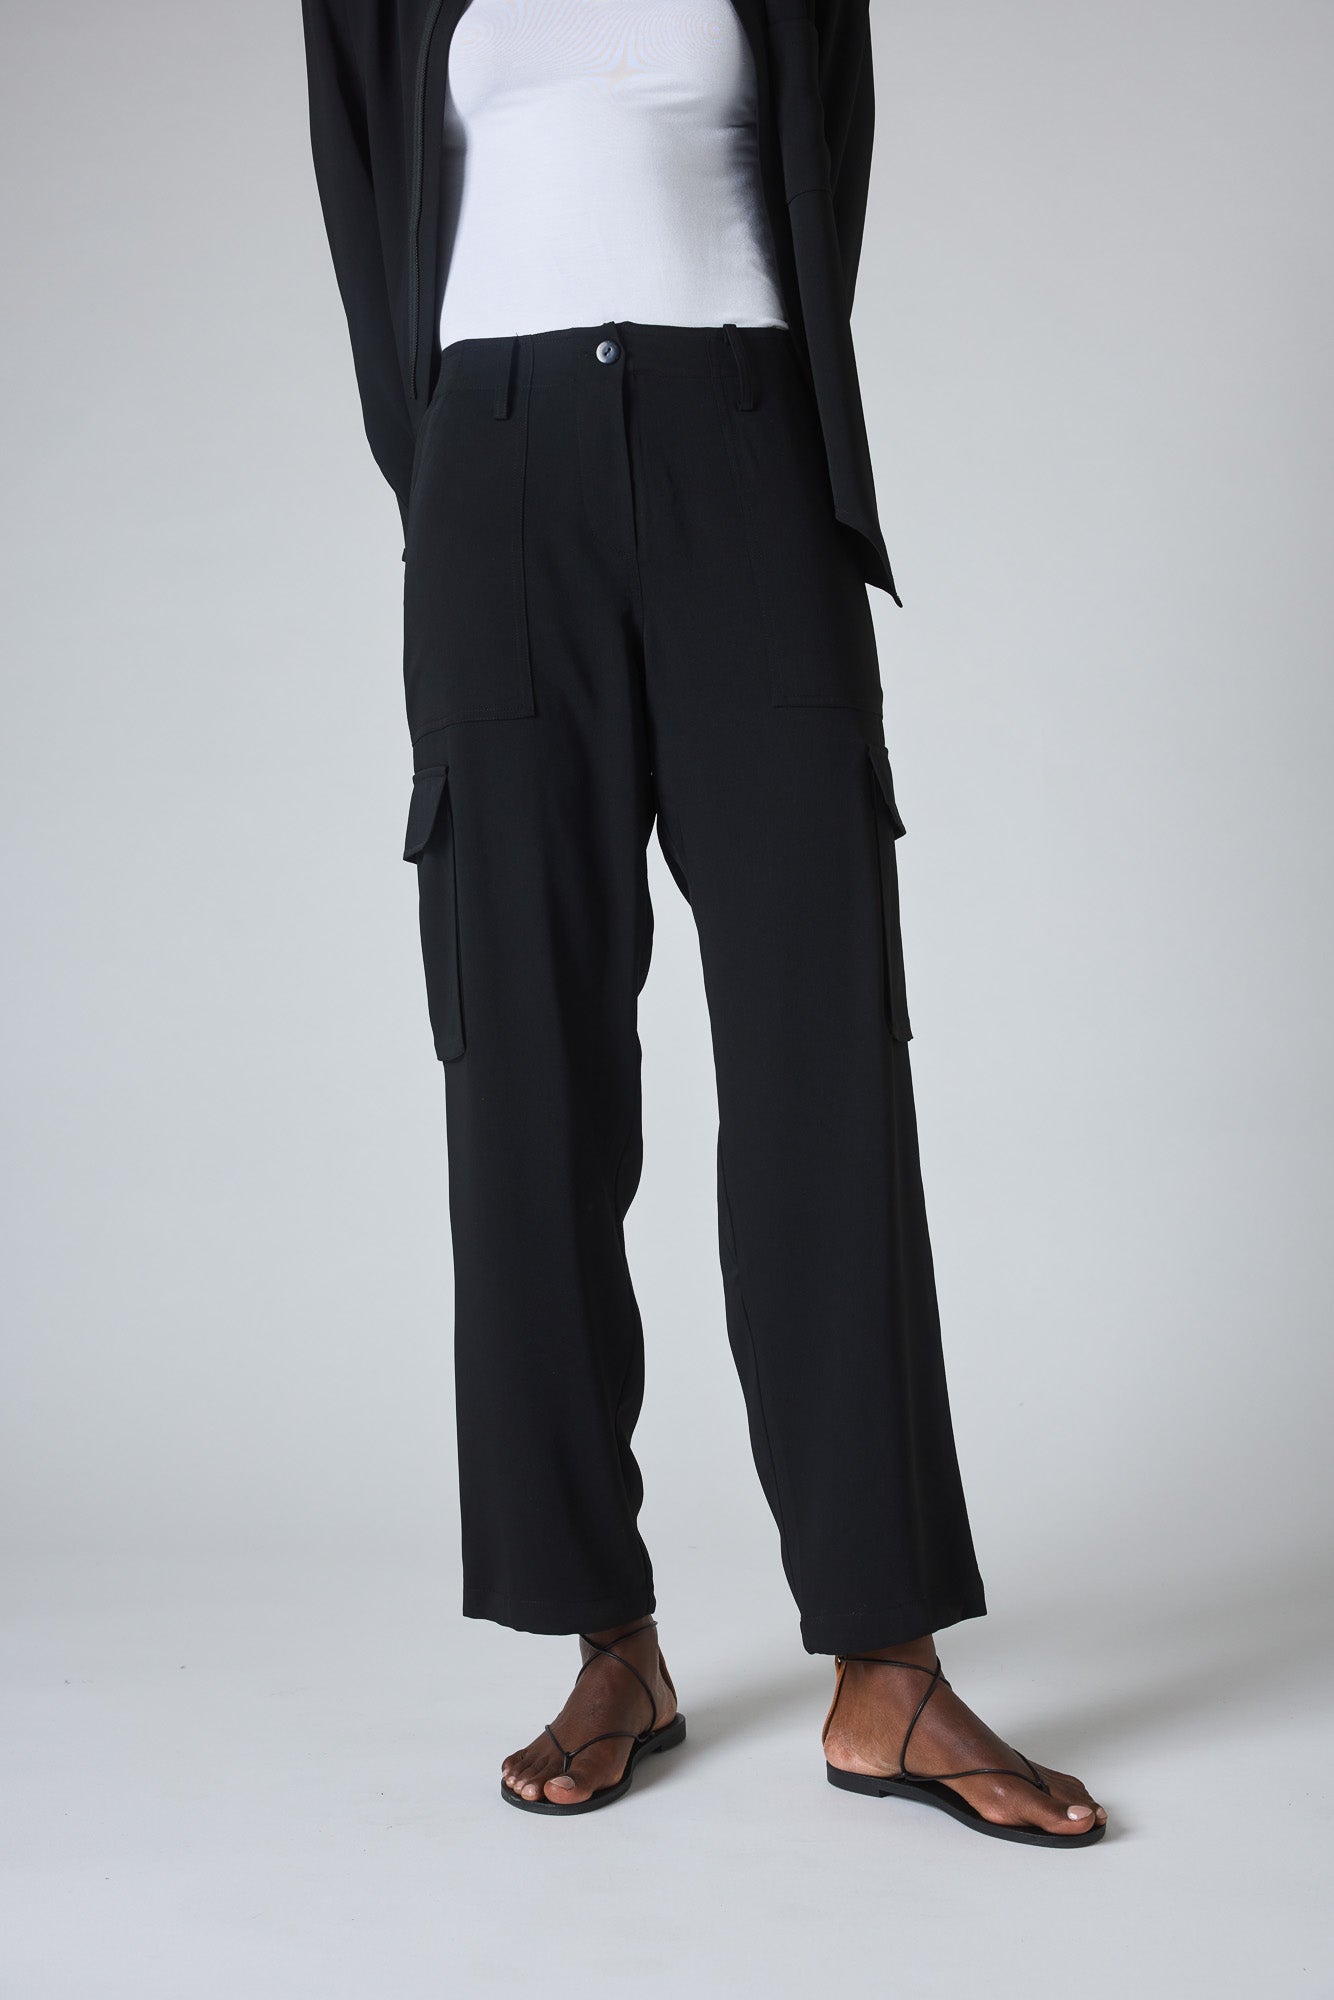 Buy Black Trousers & Pants for Men by INDEPENDENCE Online | Ajio.com